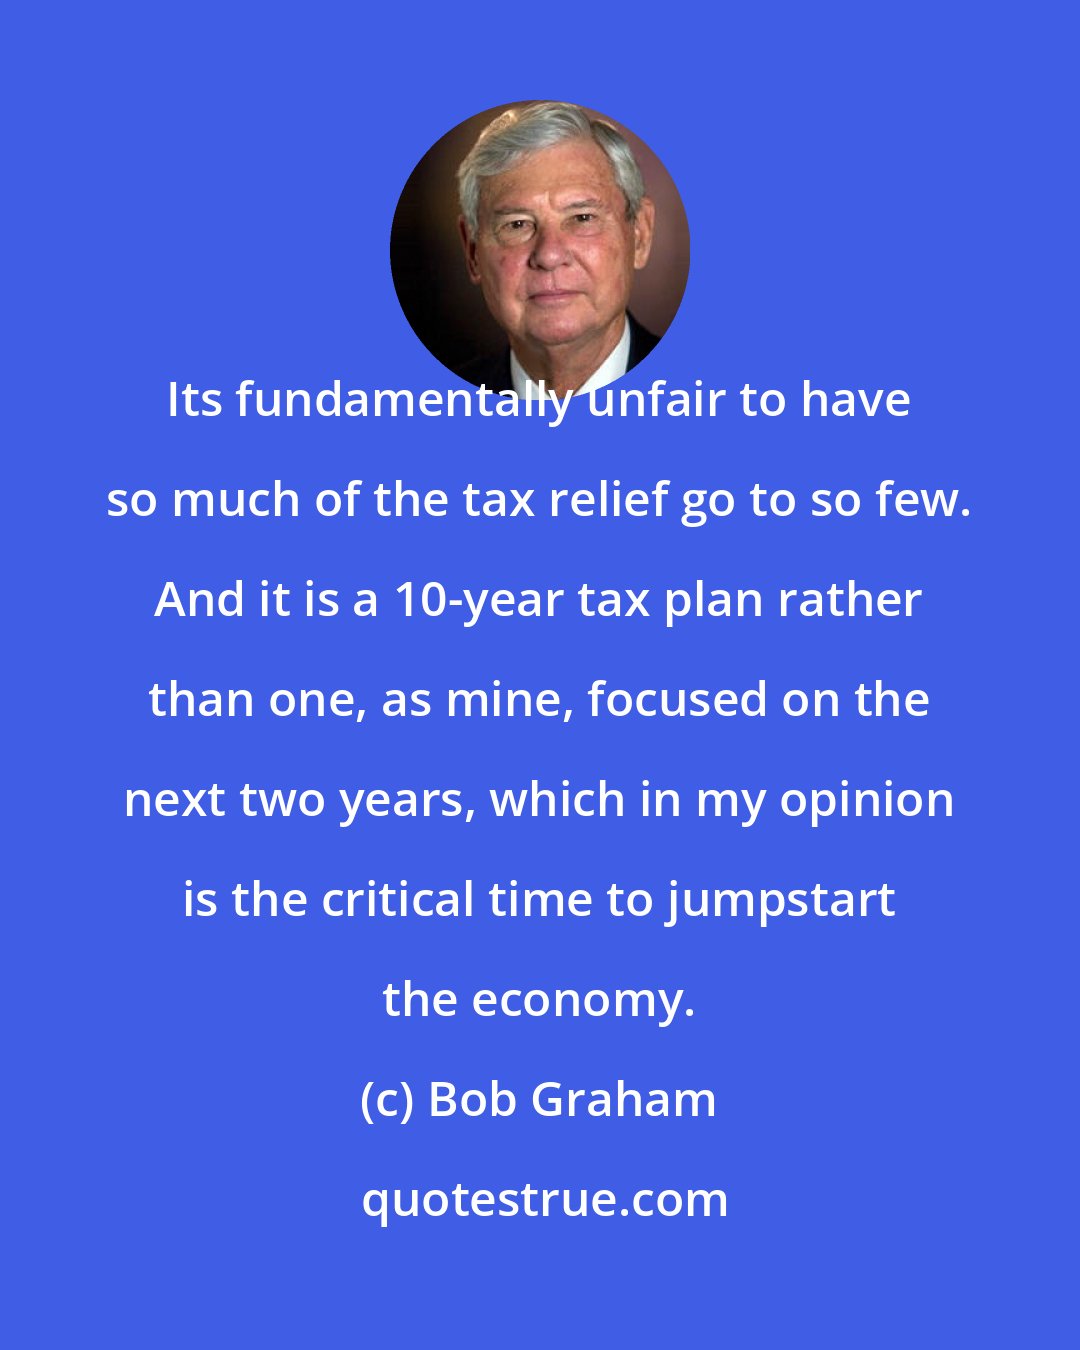 Bob Graham: Its fundamentally unfair to have so much of the tax relief go to so few. And it is a 10-year tax plan rather than one, as mine, focused on the next two years, which in my opinion is the critical time to jumpstart the economy.